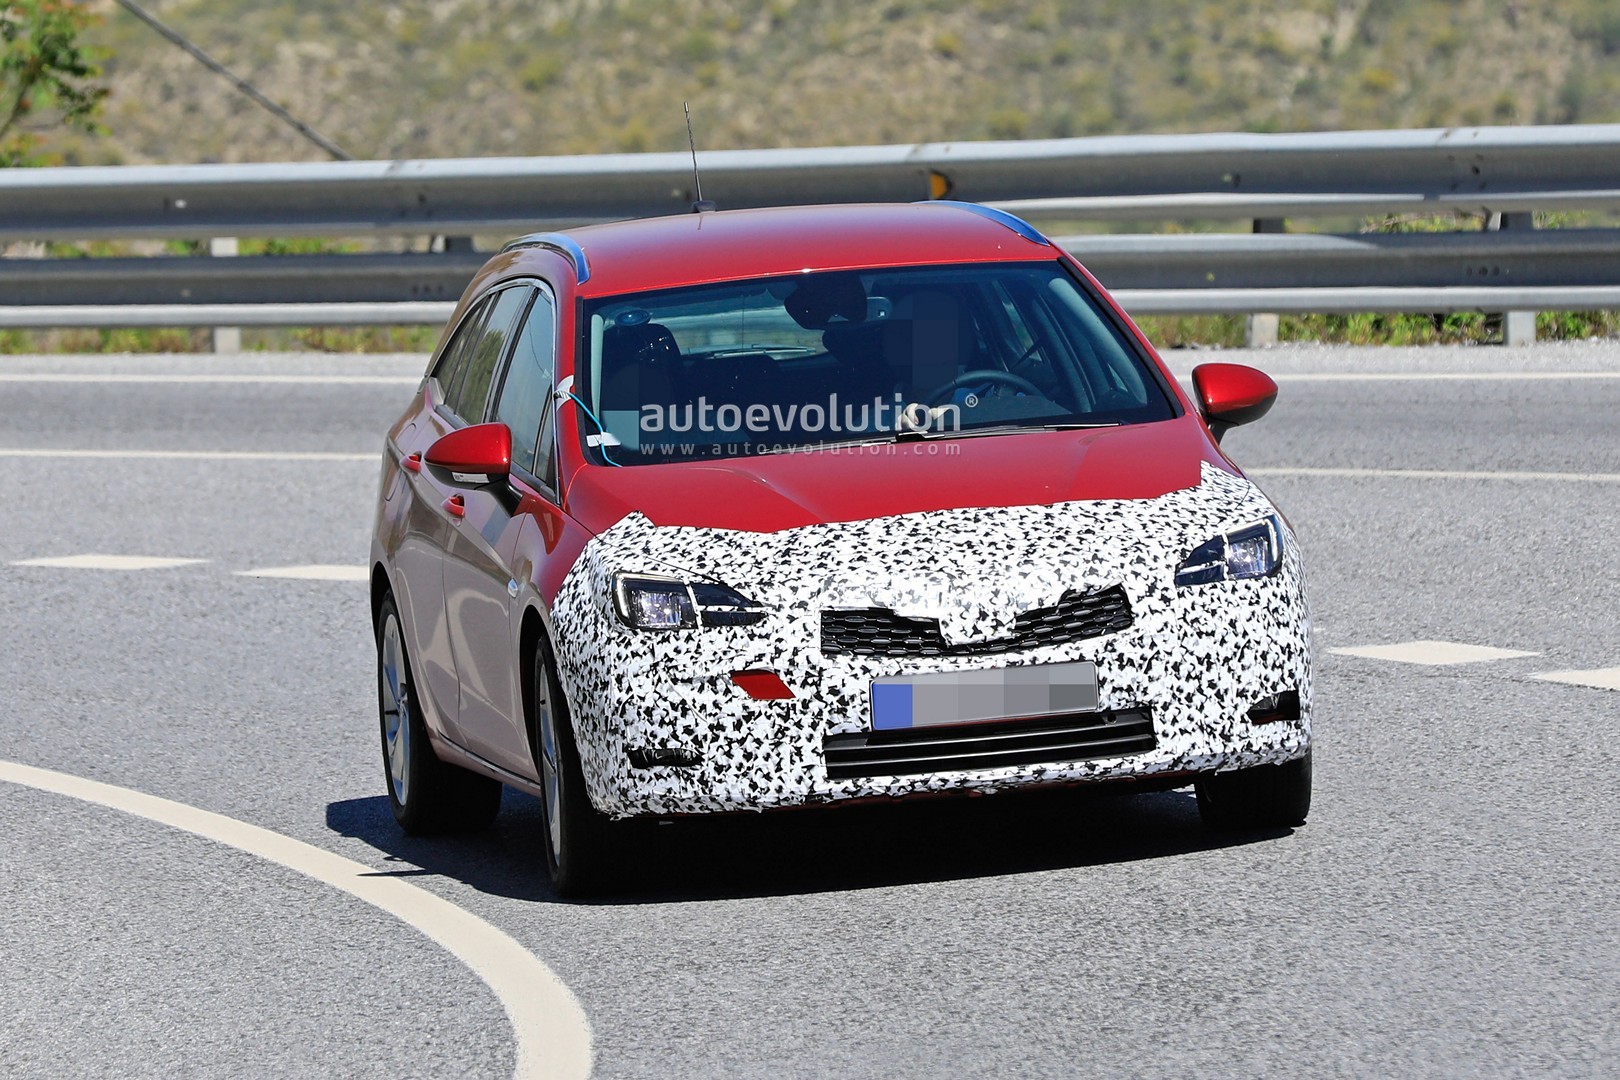 2020 Opel Astra Wagon Spied With Mild Facelift Getting Ready For